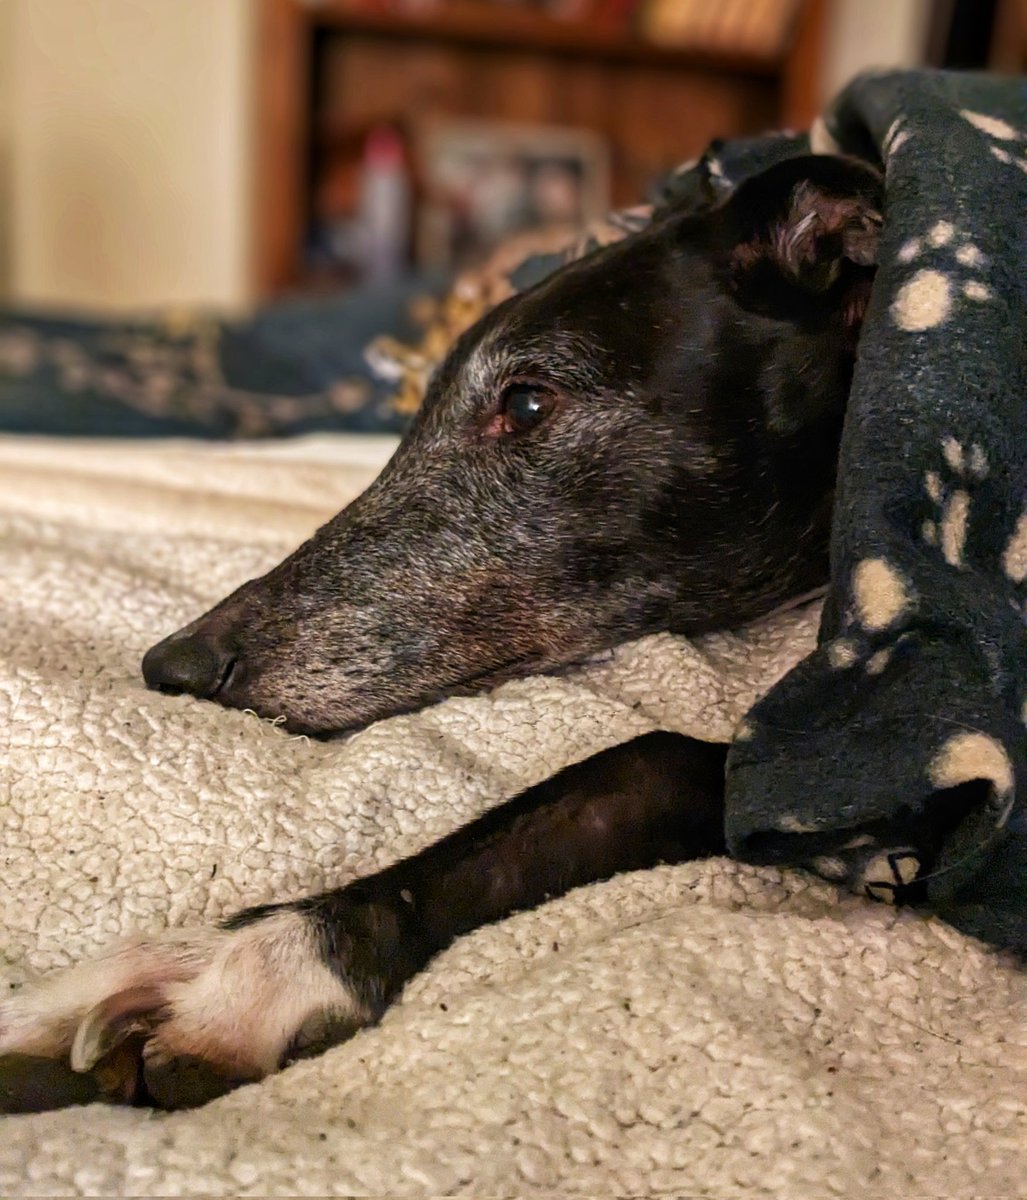 Have a good night, friends. There's an extra blessing going out to any doggo not yet living his/her best life waiting for their forever home. Keep the faith, someone will come along soon with open arms and a big heart. 
#PetsNotBets